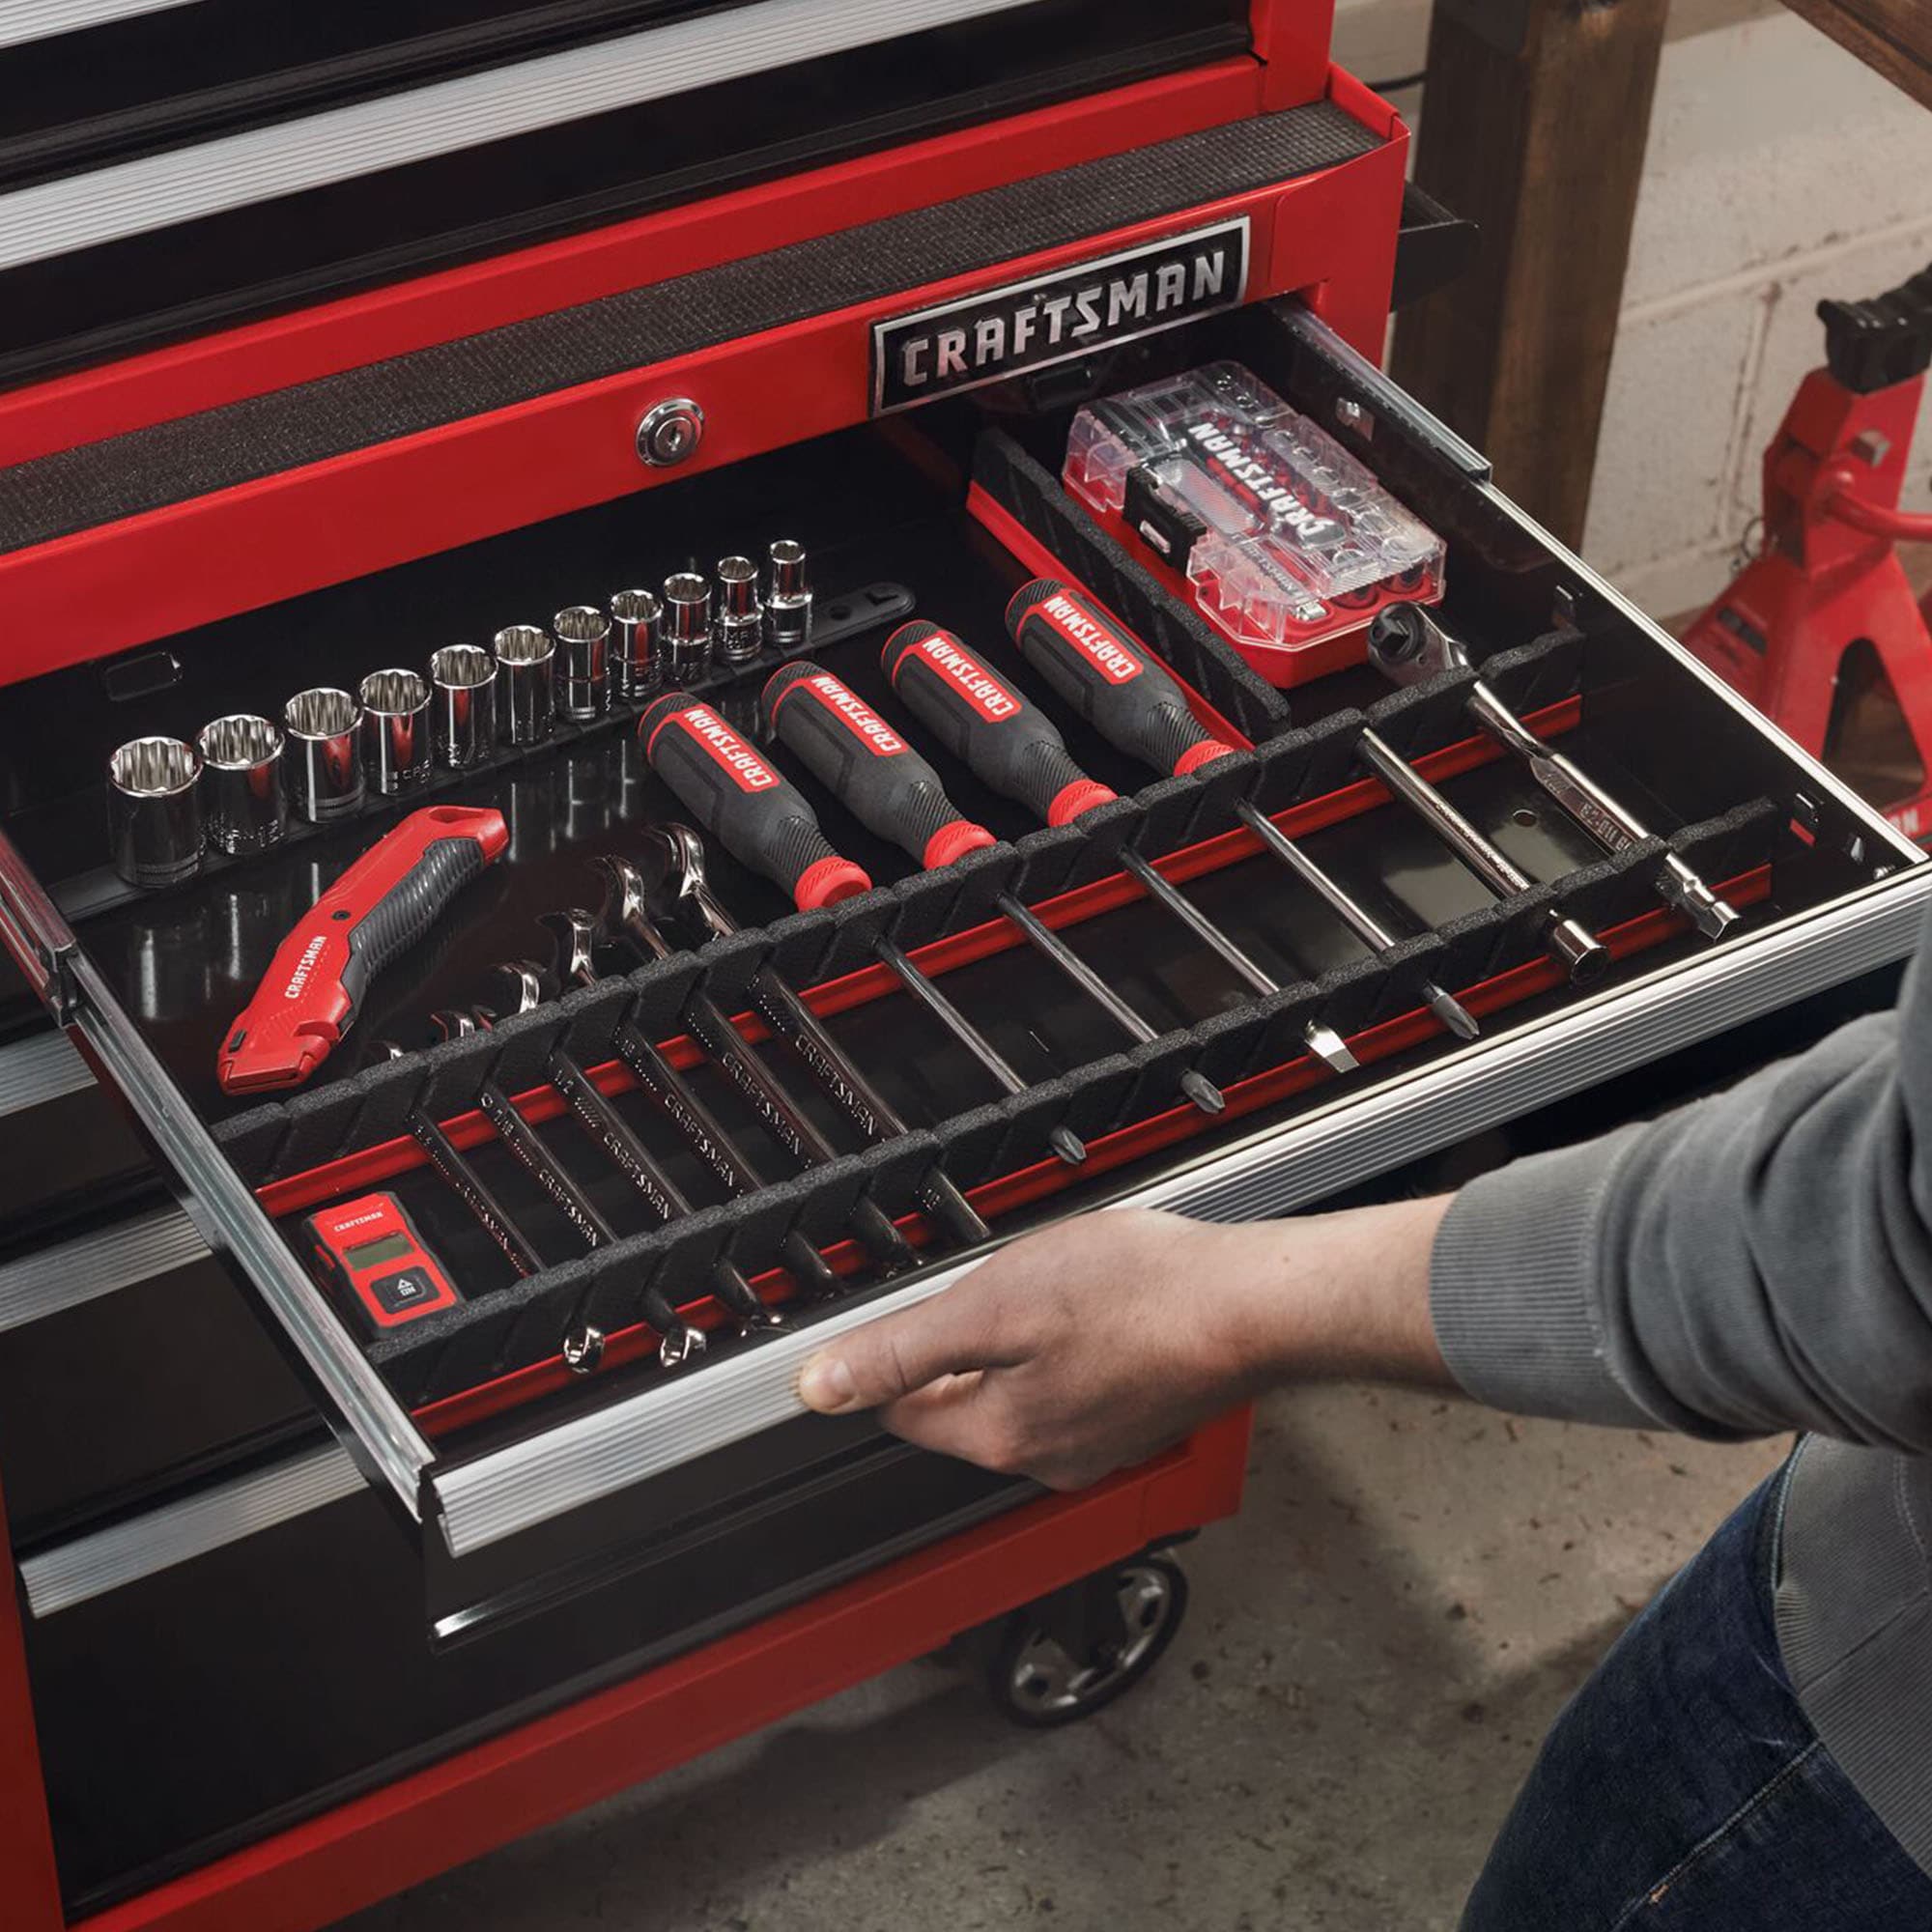 Wrench Organizer For Craftsman Tools, ToolBox Chest Cart Standard